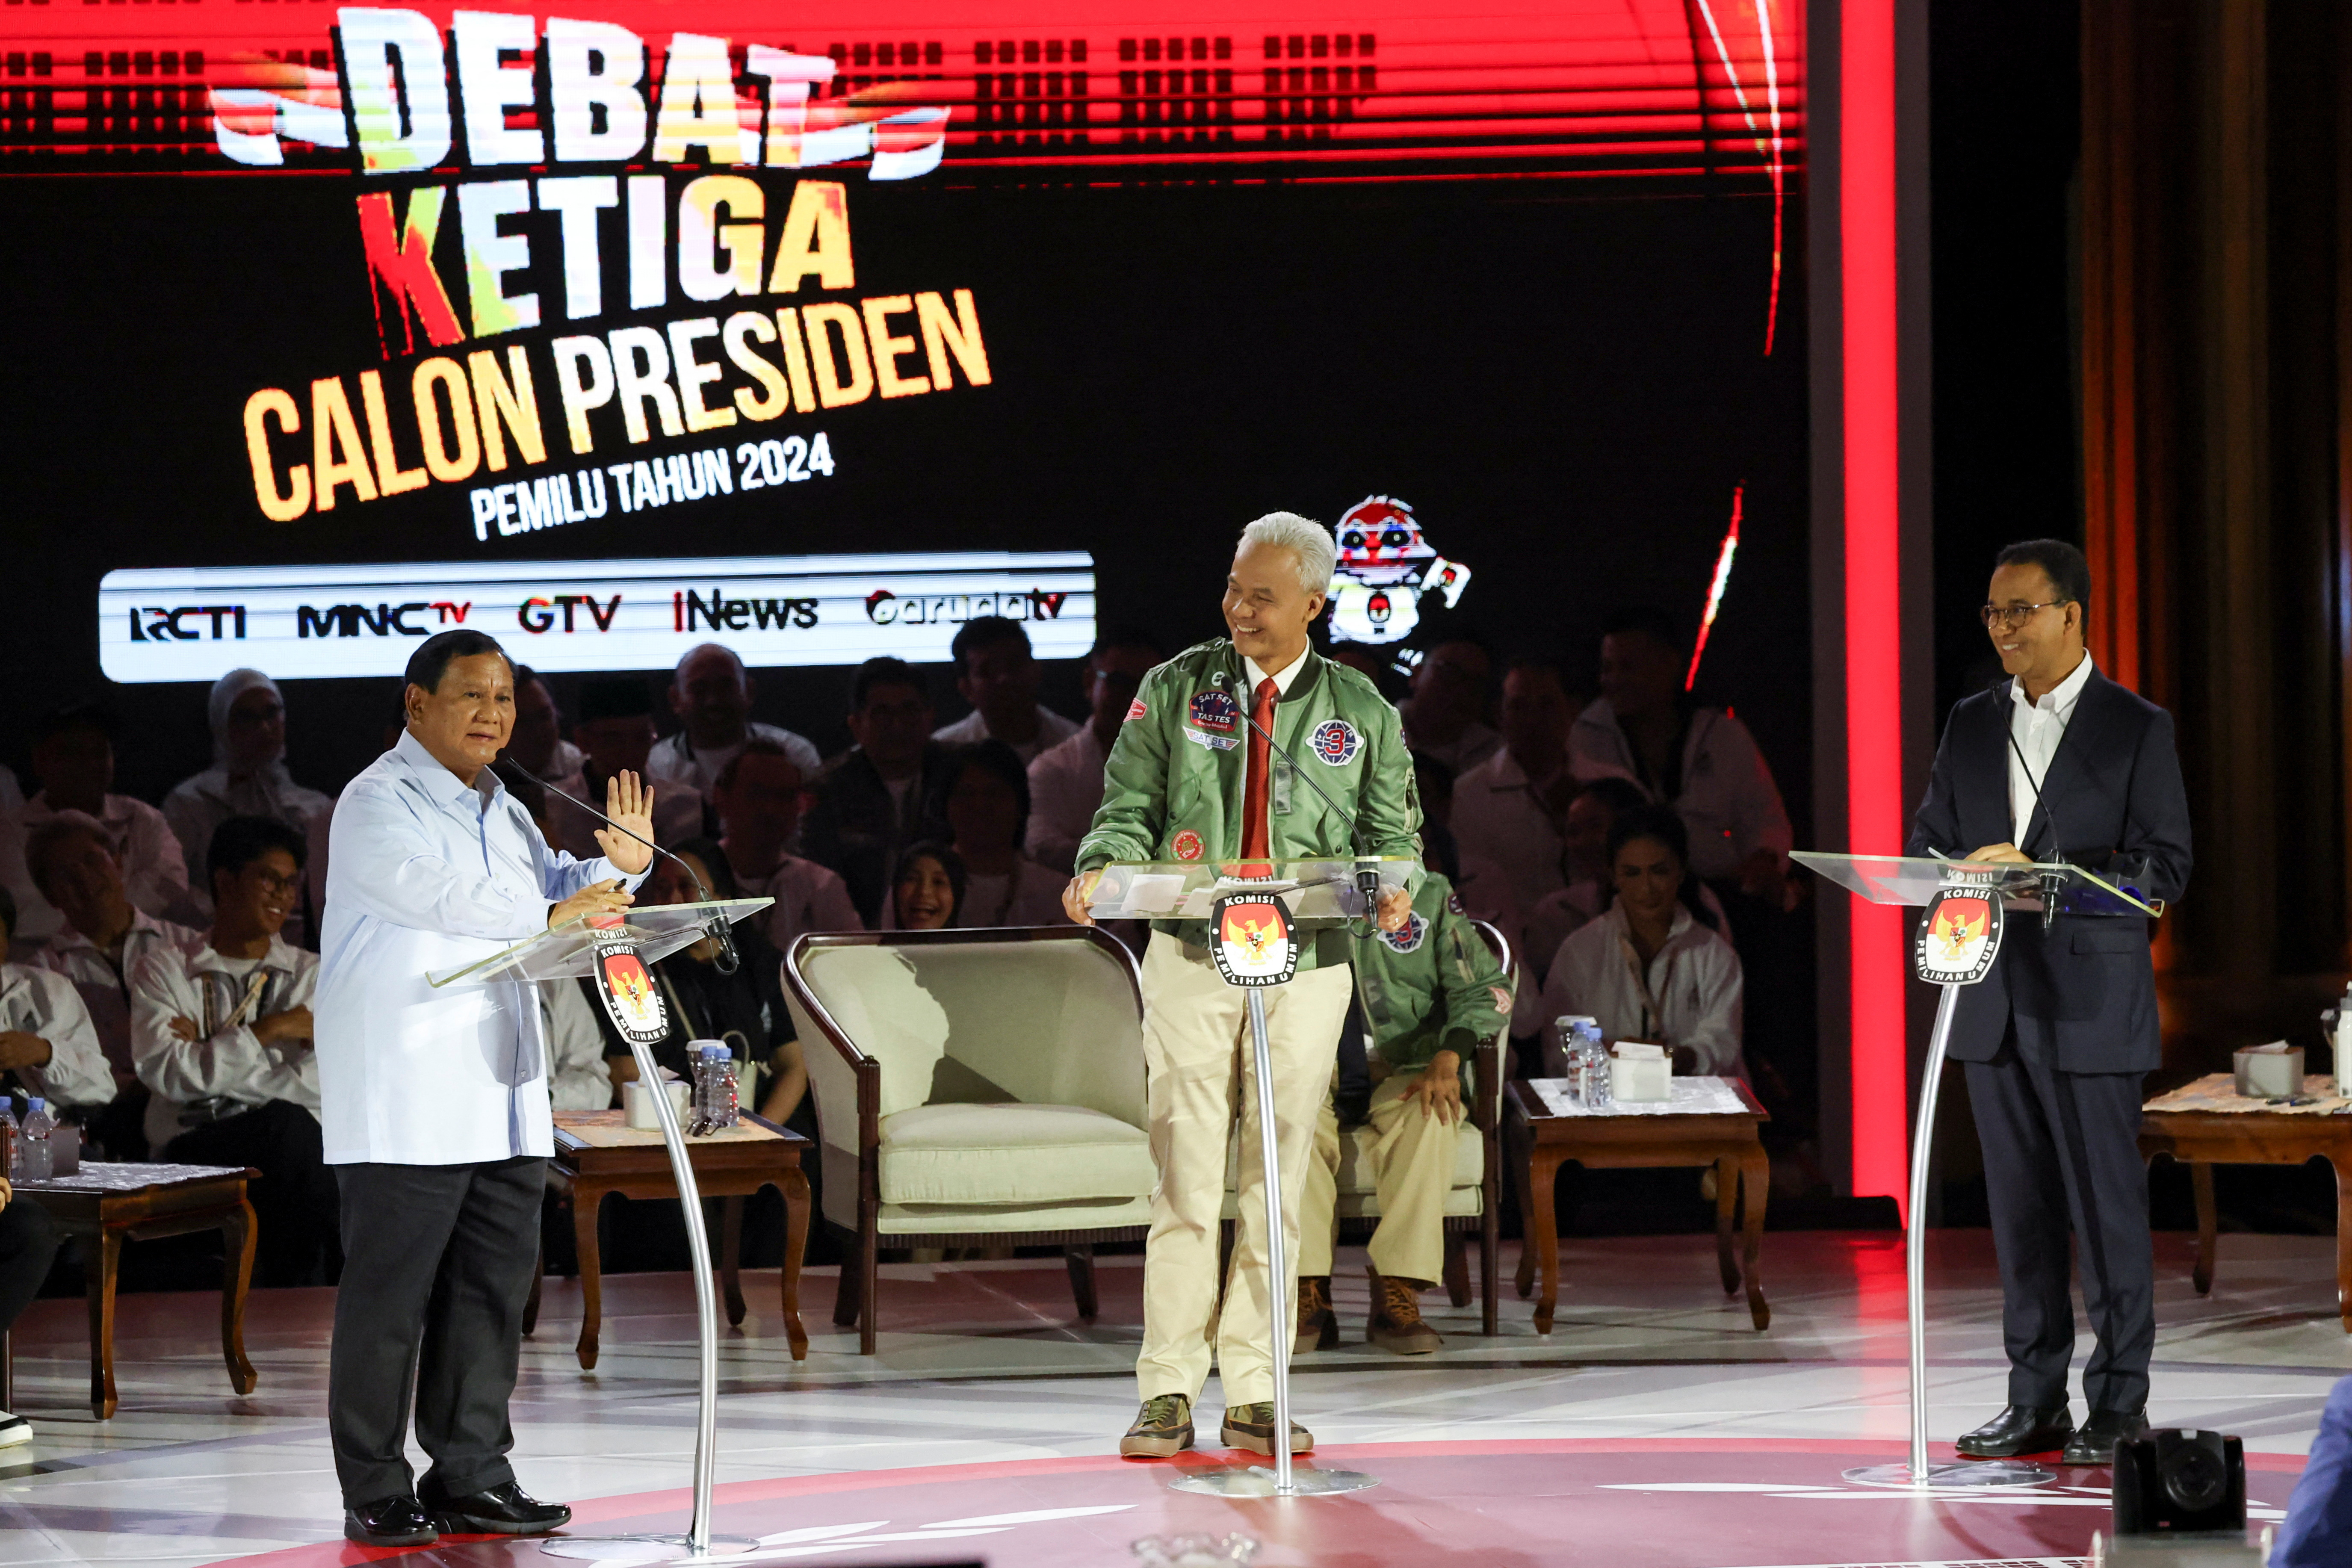 Indonesia's election body holds presidential candidate debate in Jakarta